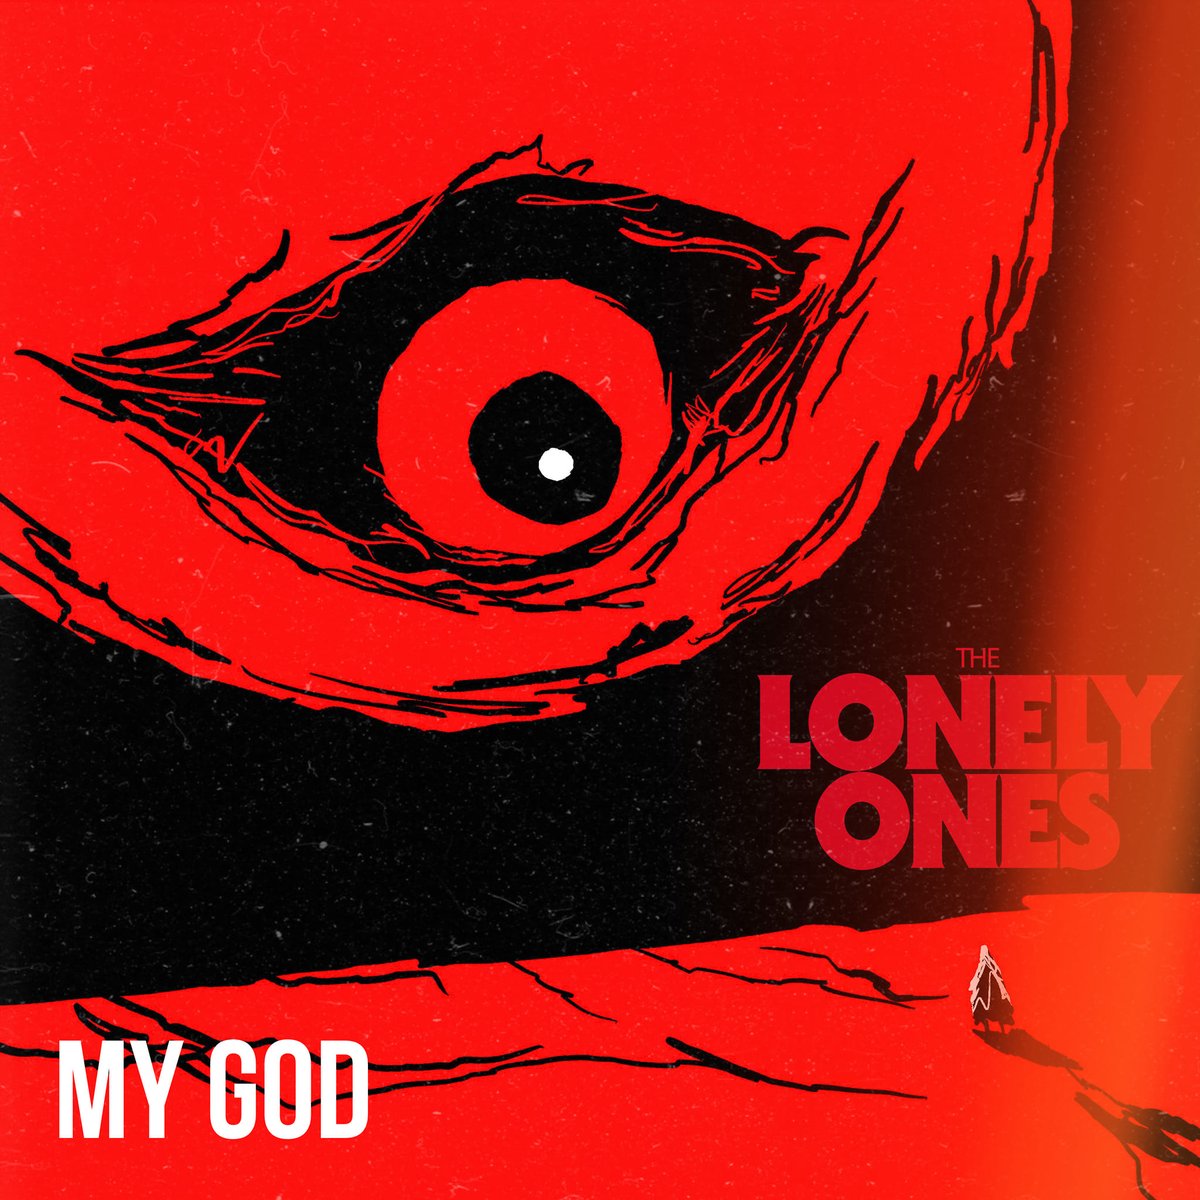 New Rock Releases:

The Lonely Ones @_thelonelyones_ release My God #MyGod #Rock #NewRock #IconicRock #NewMusic #NextWaveofRock #ModernRock #ClassicTones #NWOCR #NewMusicAlert #NewRockReleasesAlert #NewRockReleases #TheLonelyOnes
March 26, 2024

🎧 youtu.be/OqQbv-A02d4